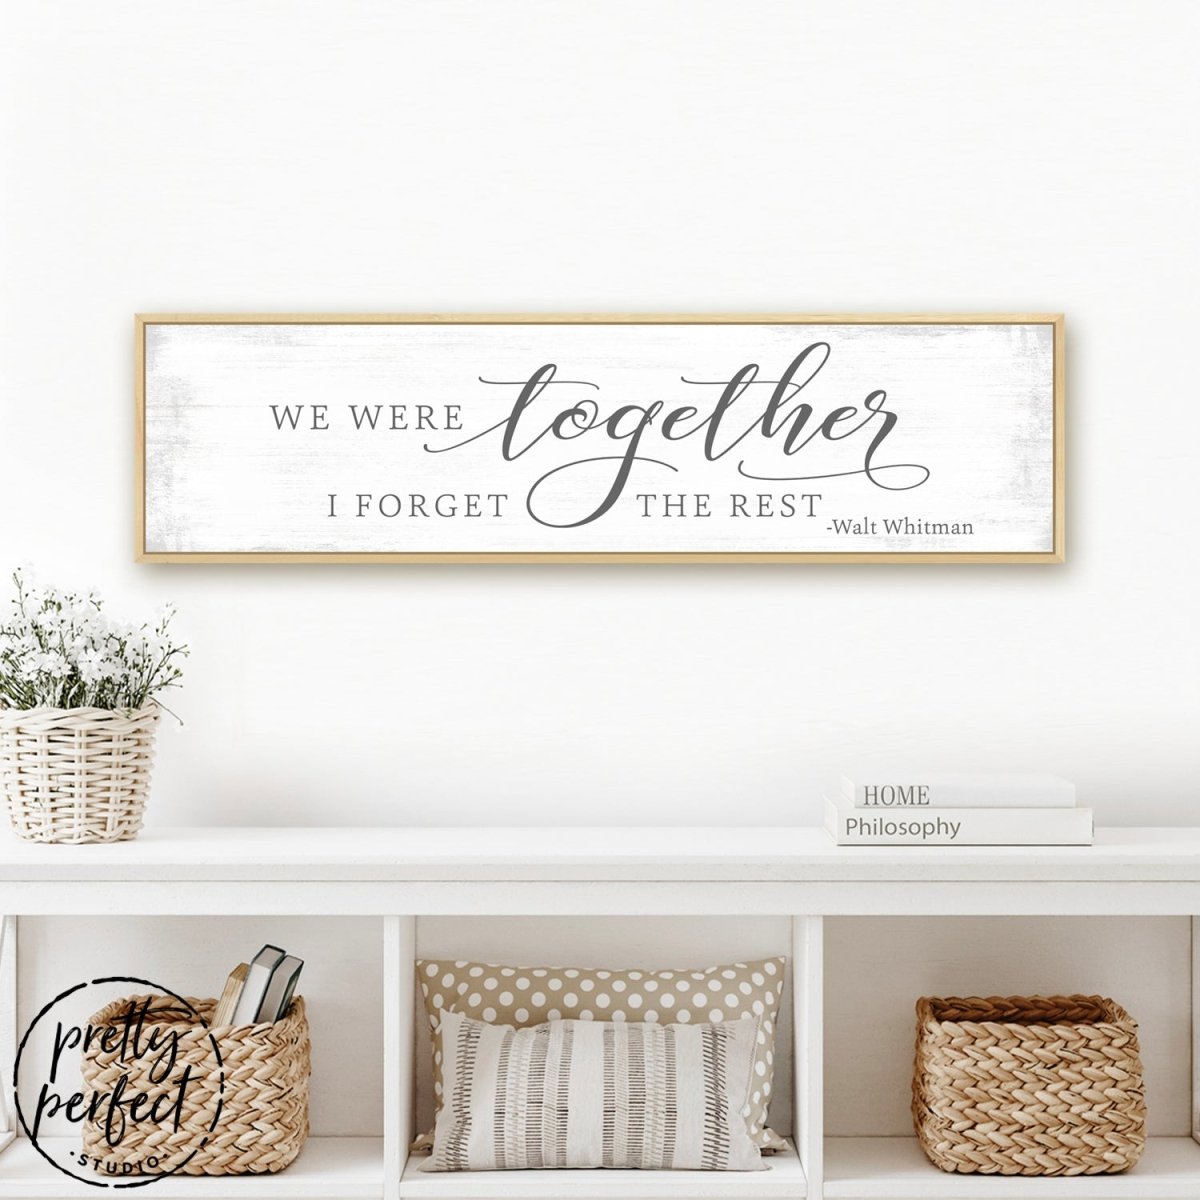 We Were Together I Forget the Rest Sign in Living Room - Pretty Perfect Studio